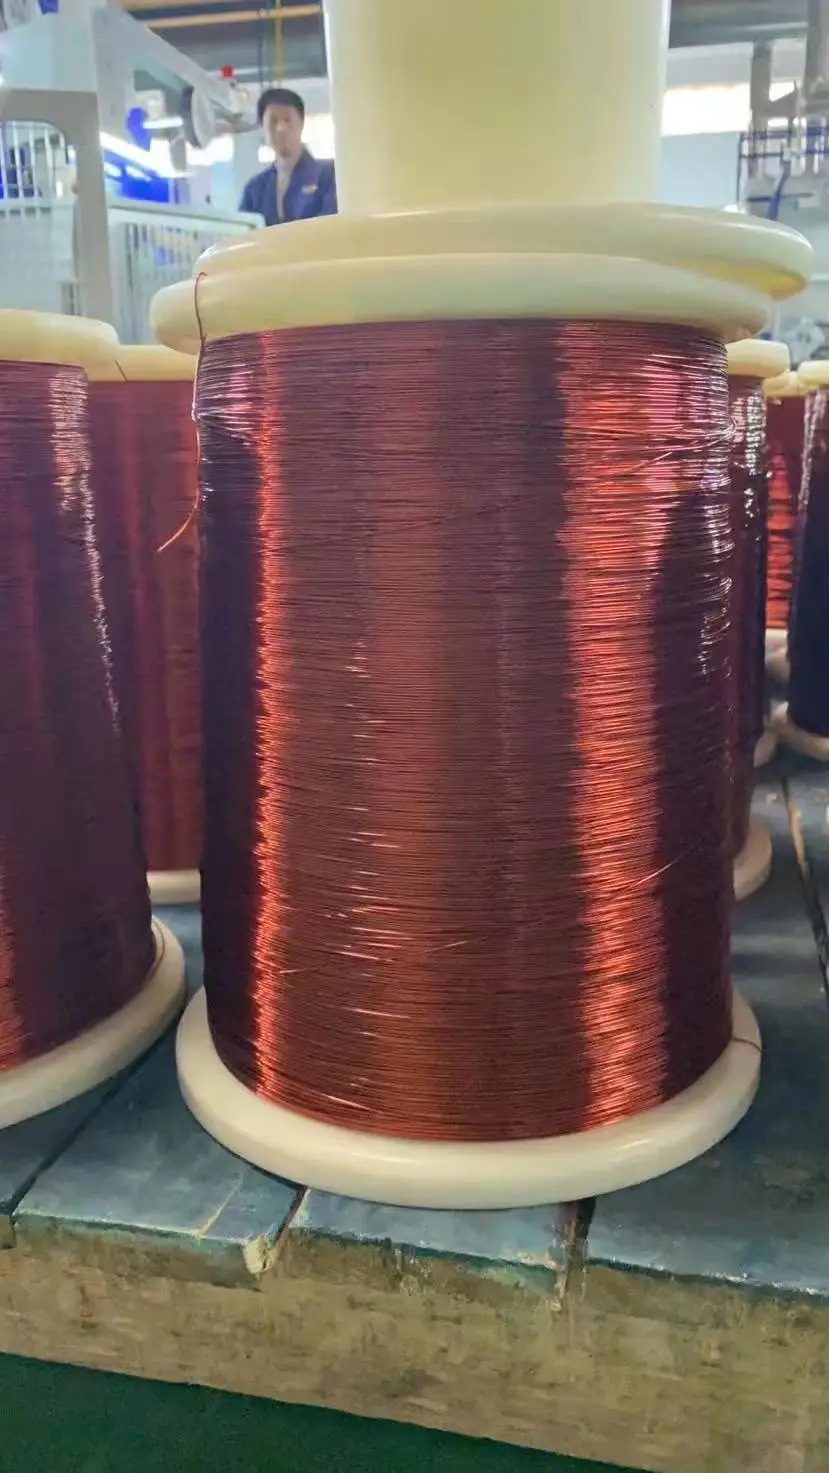 Copper enamelled wire UEW Pew EIW 0.030mm-2.50mm fan coil made in China